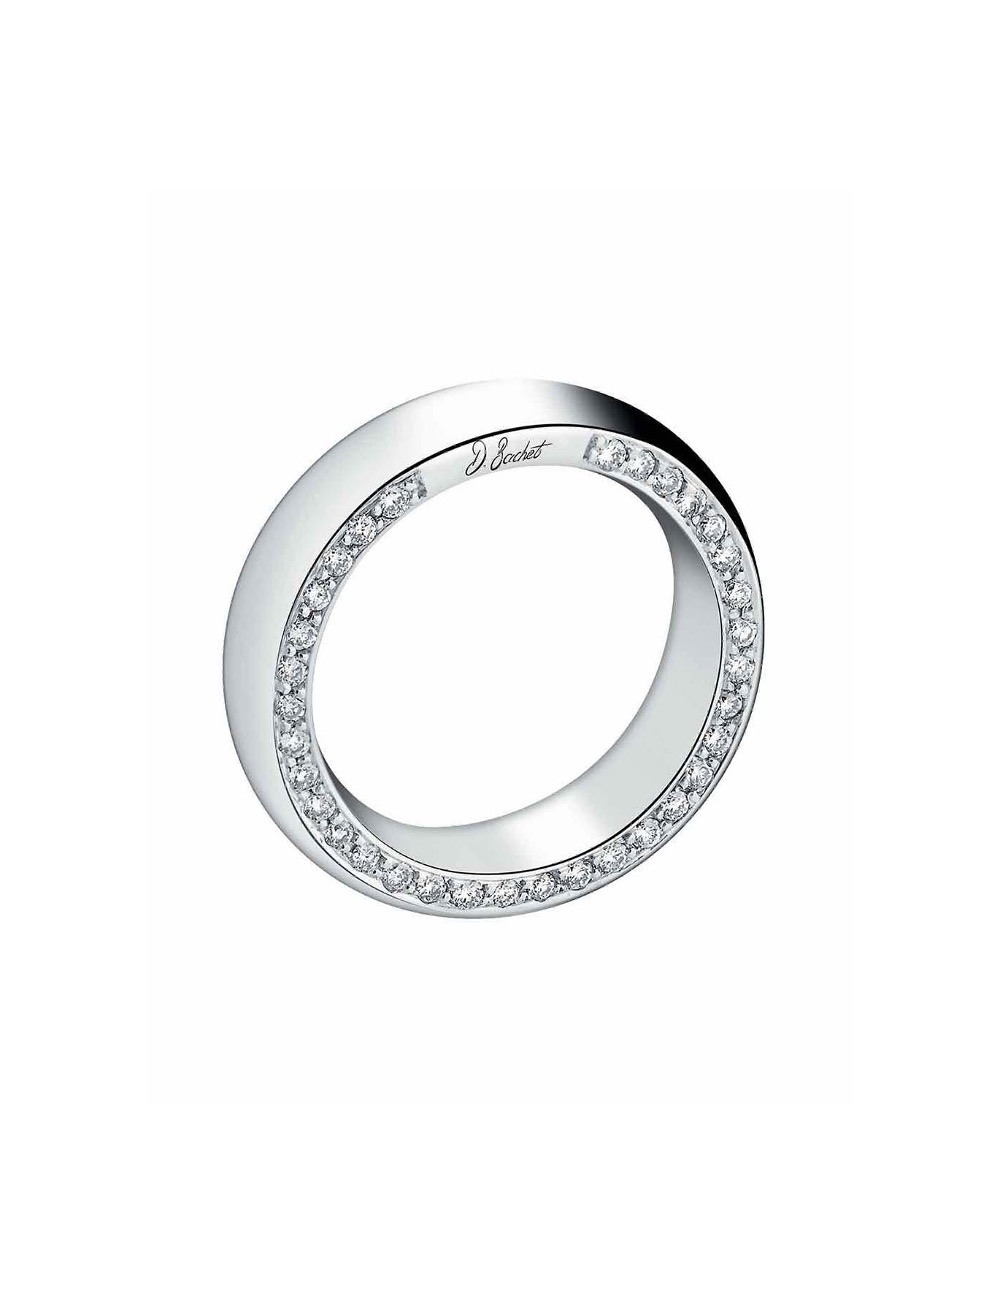 A modern and wide wedding ring set with white diamonds and black diamonds on the sides.